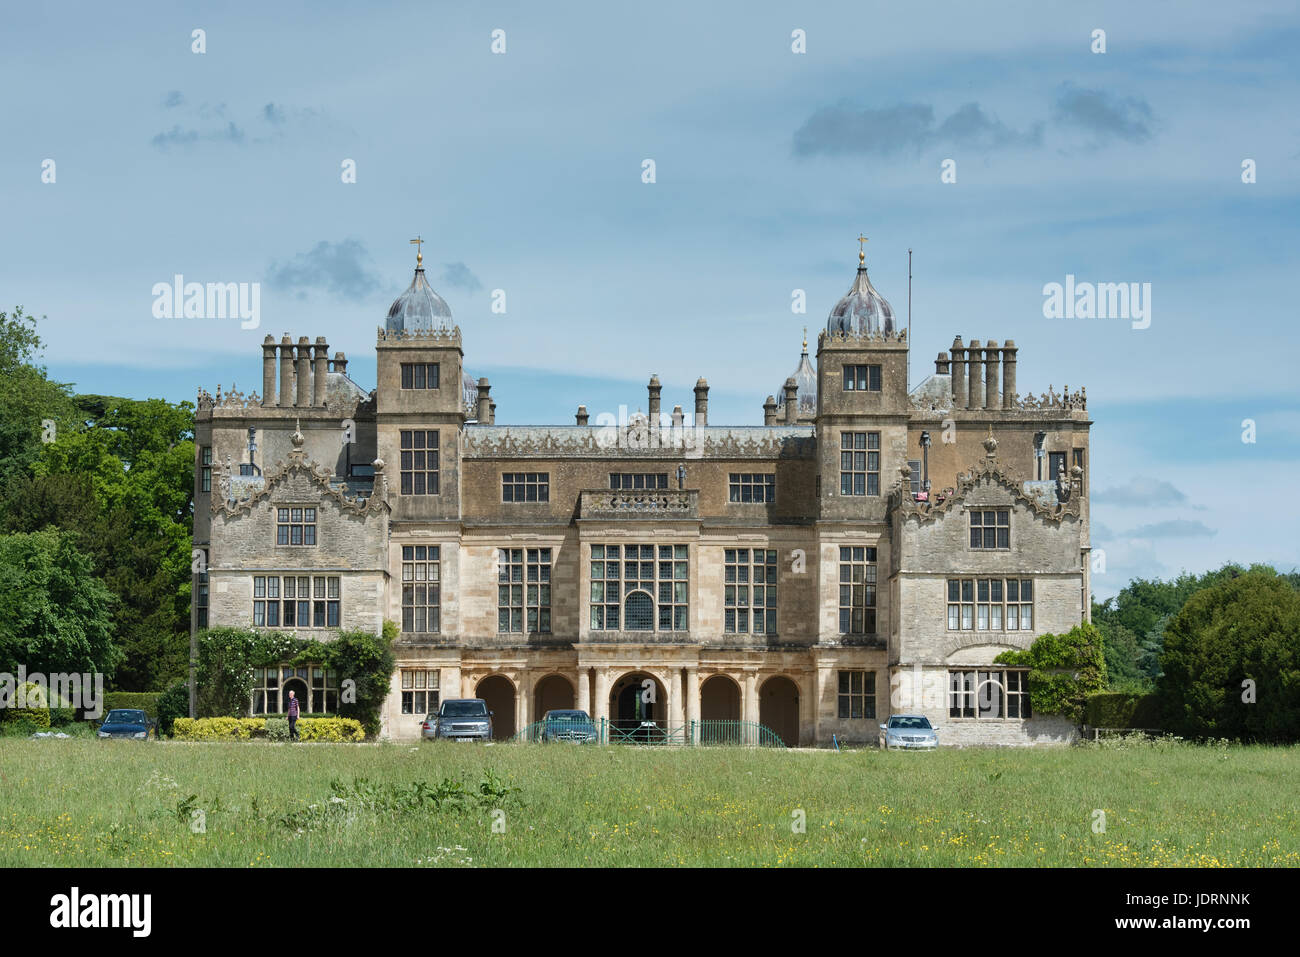 Charlton Park country house. Malmesbury, Wiltshire, Royaume-Uni Banque D'Images